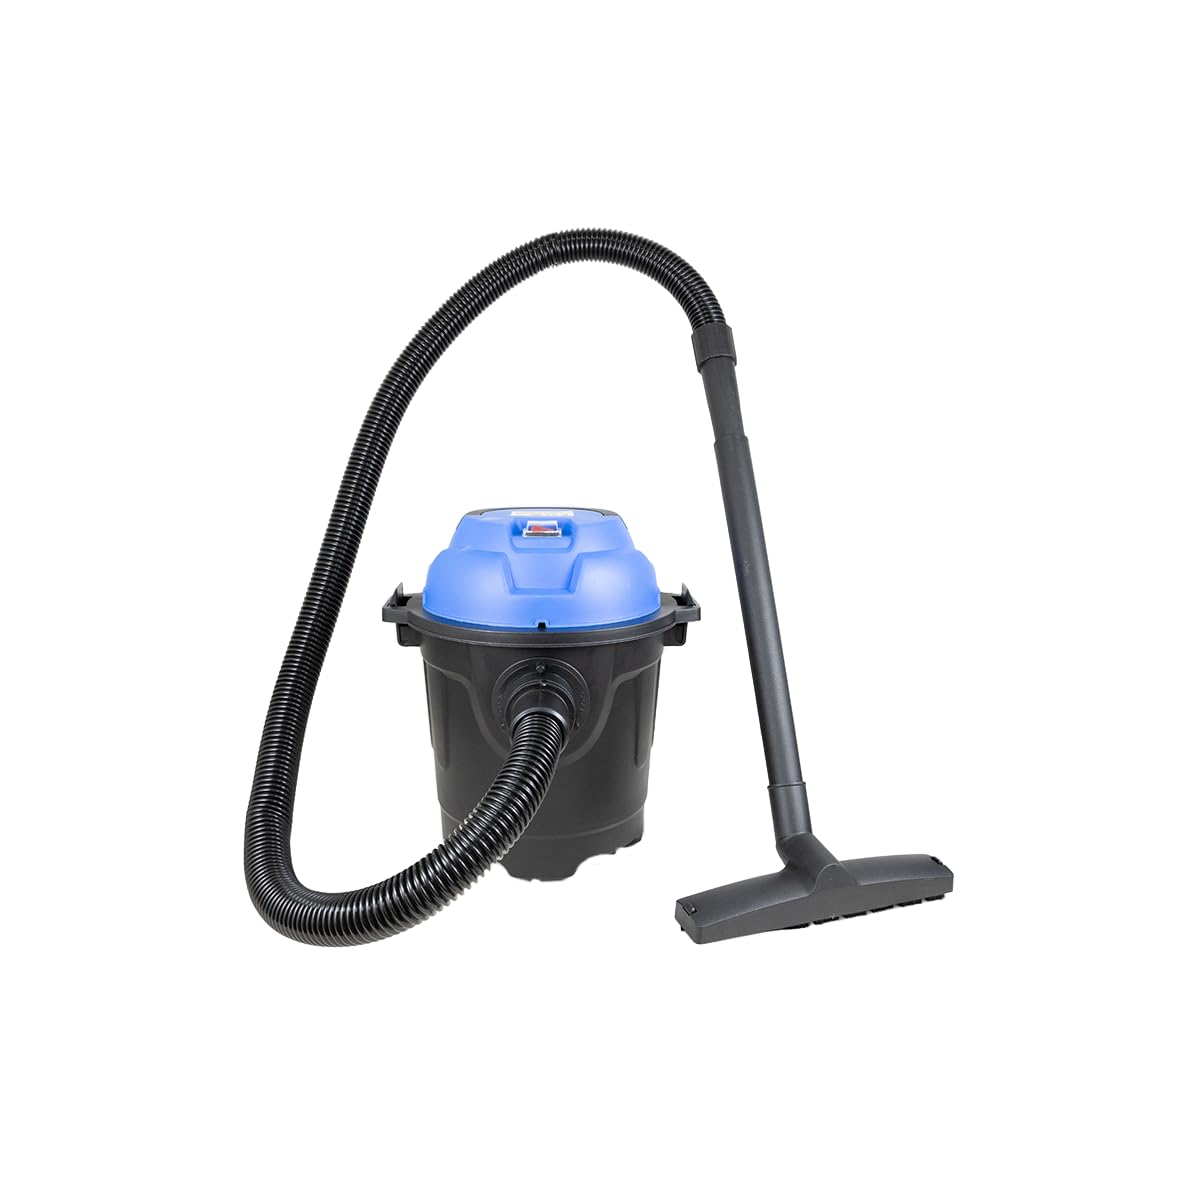 SPEAR 1000W Wet and Dry Vacuum Cleaner with 15L Capacity - Powerfull Suction, Low Noise & Efficient Cleaning for Home and Office